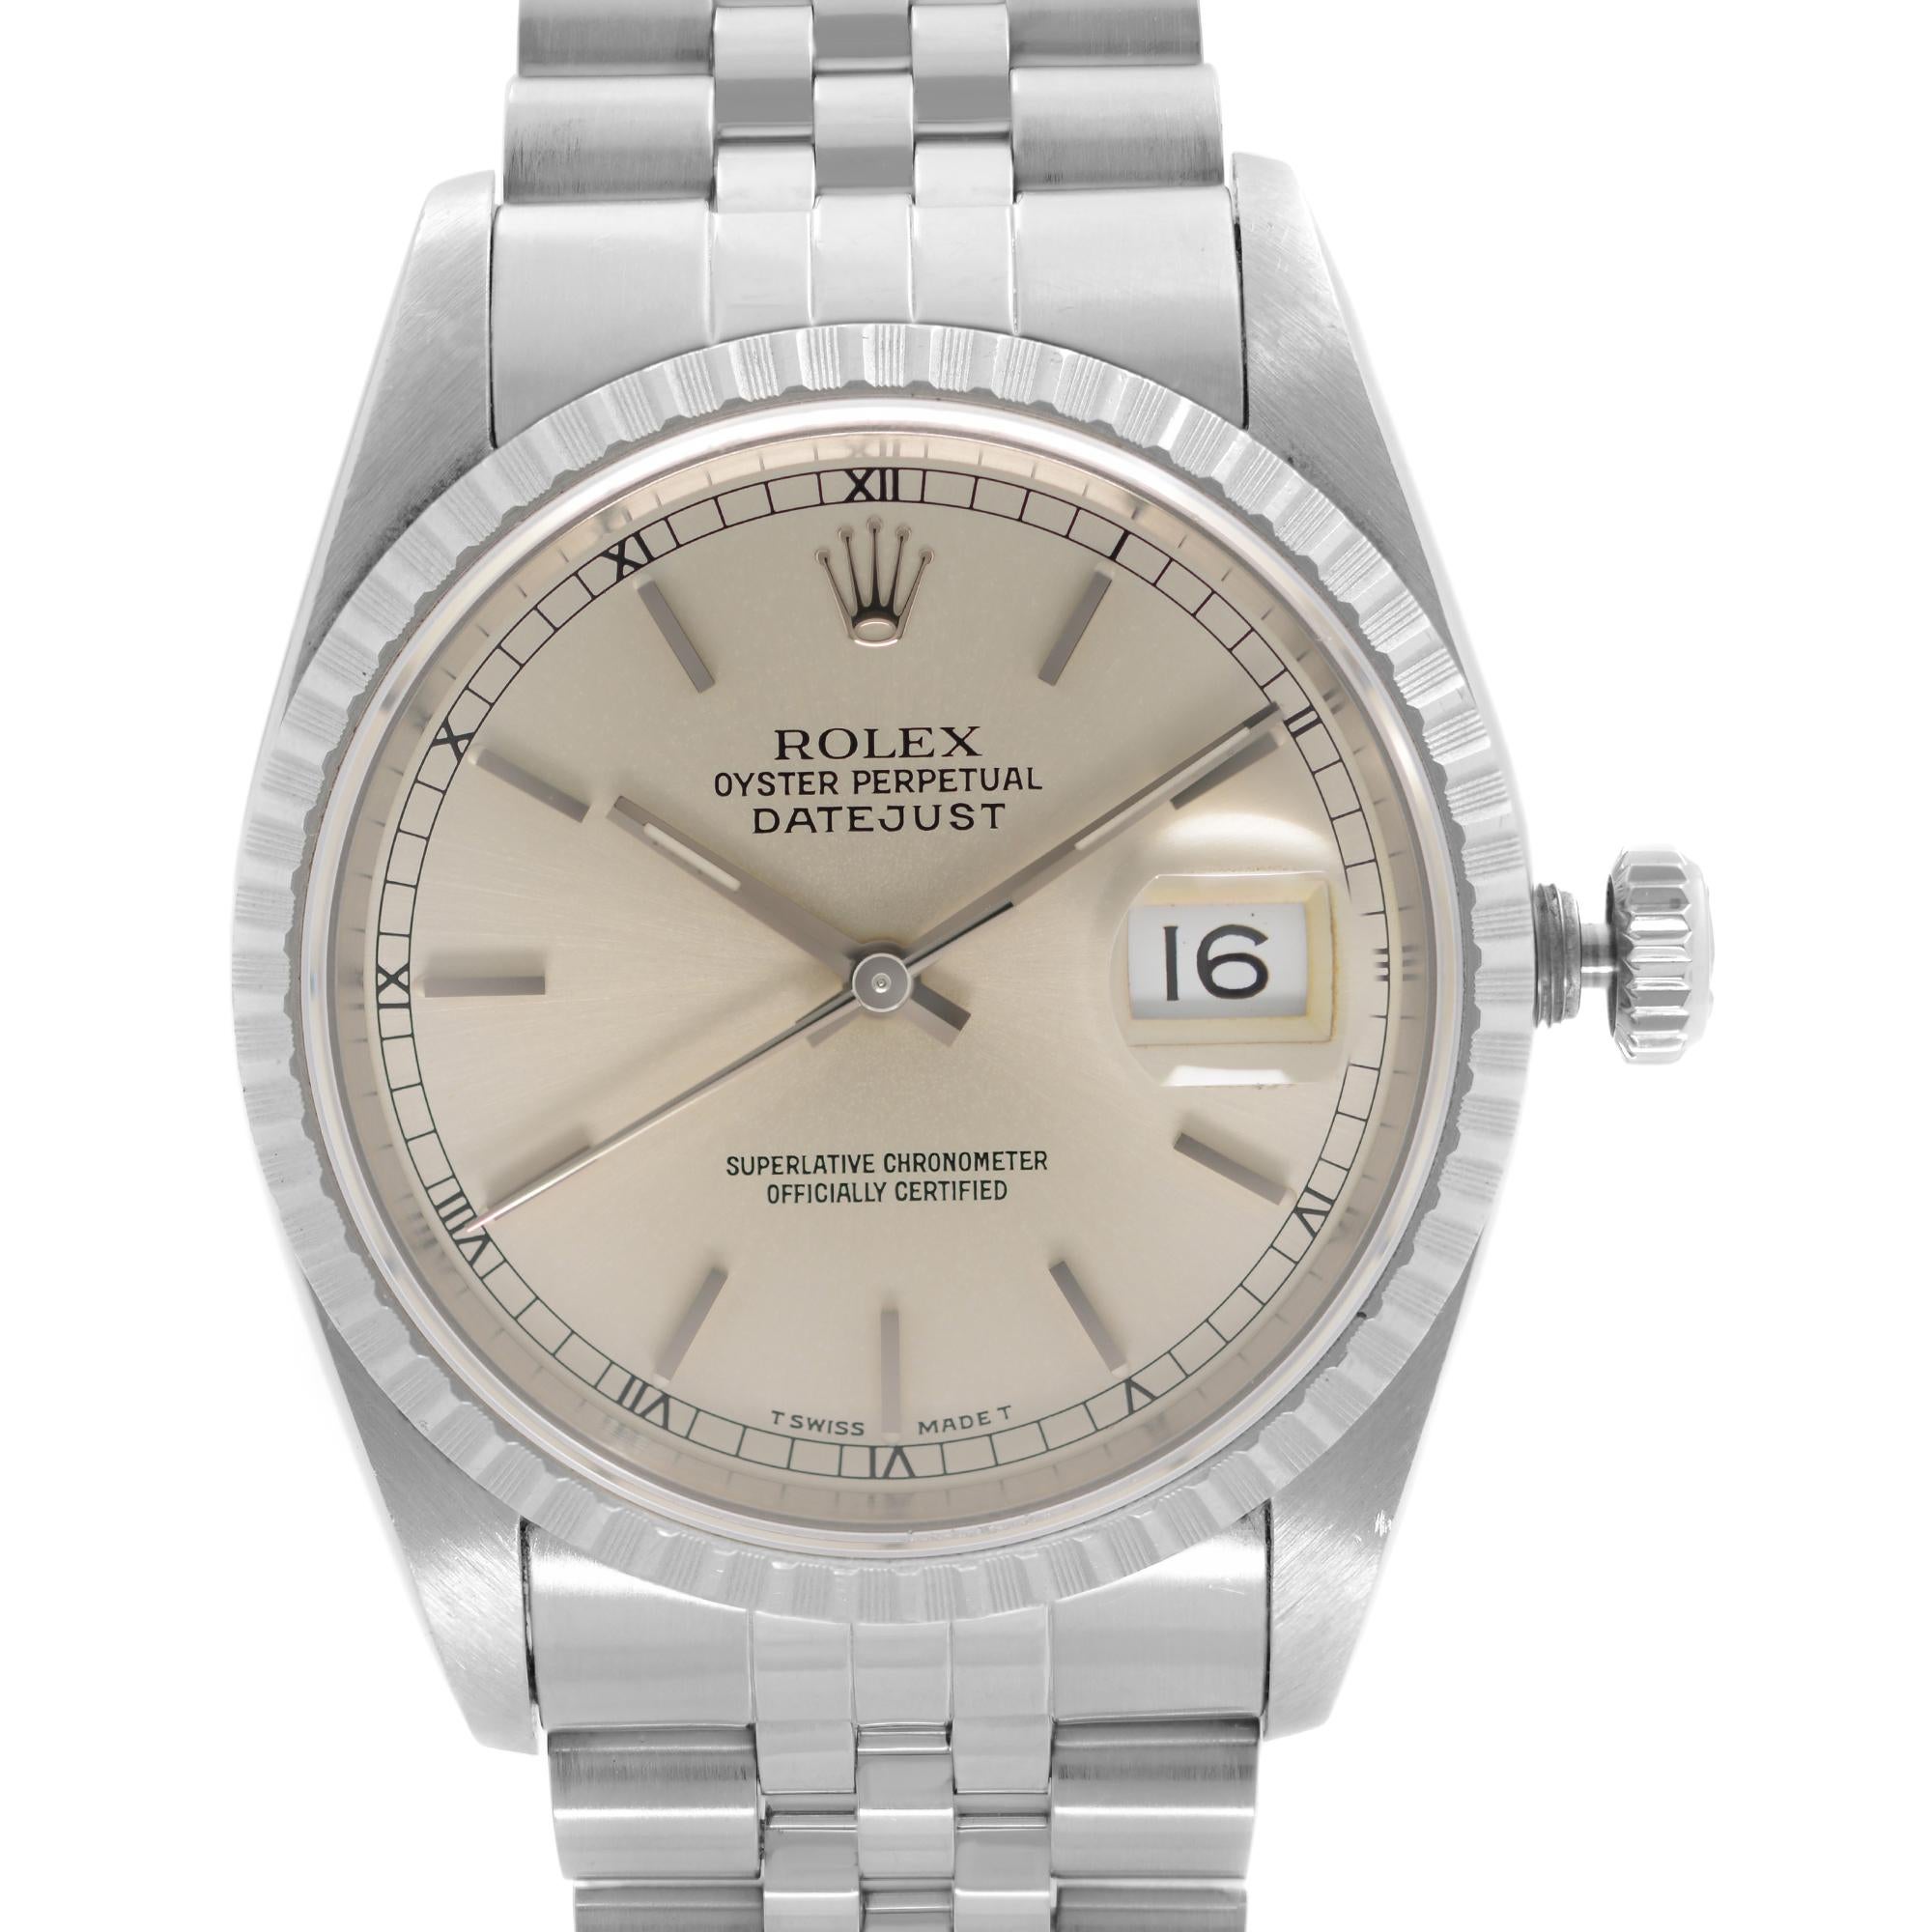 Pre Owned Rolex Datejust 36mm Holes Steel Silver Dial Automatic Men's Watch 16220. This Beautiful Timepiece was Produced in 1991 & is Powered by Mechanical (Automatic) Movement And Features: Round Stainless Steel Case with a Stainless Steel